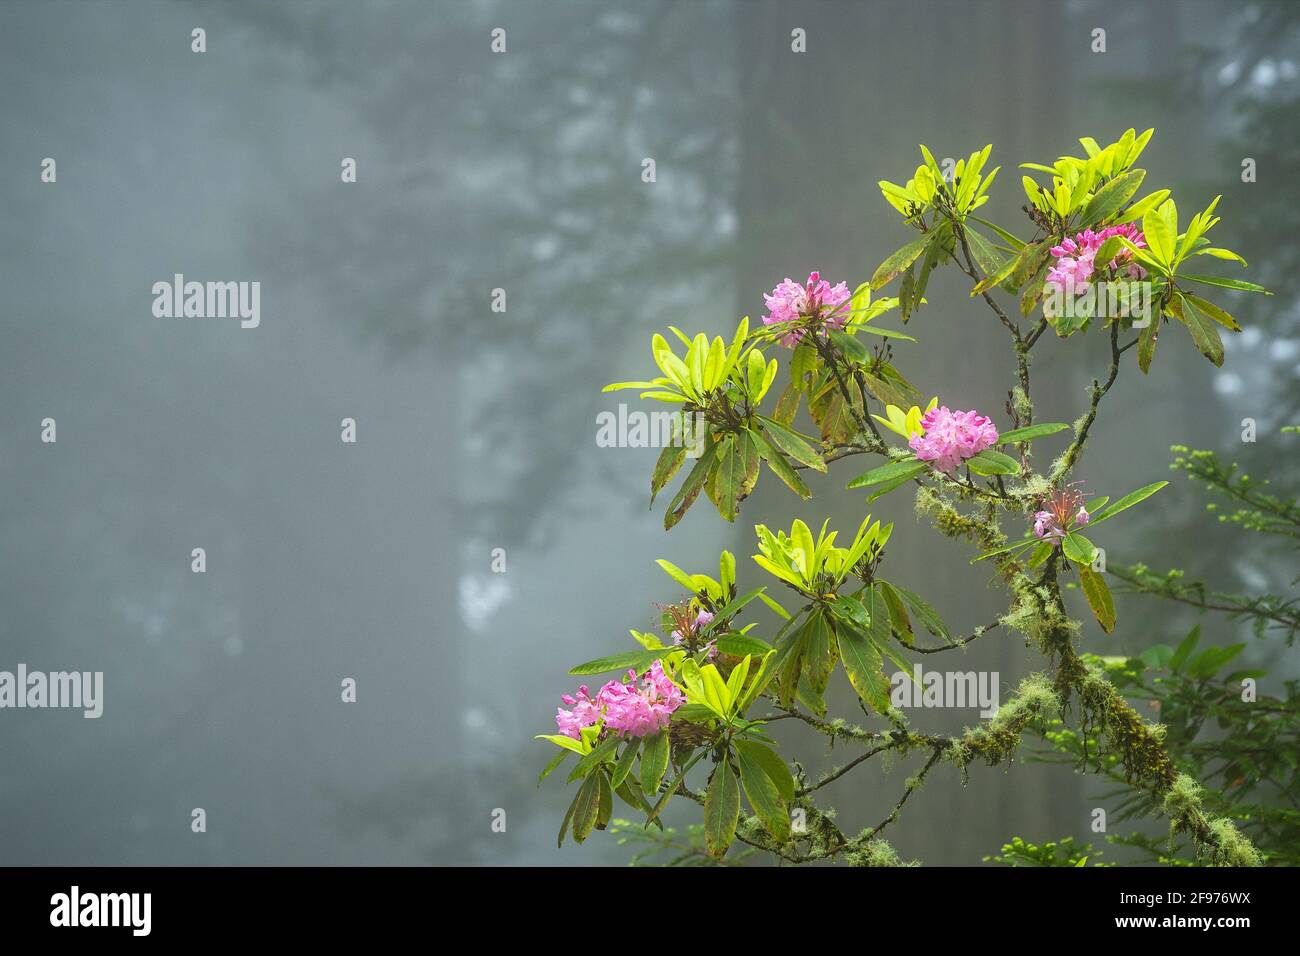 Rhododendron blooming in the fog, Del Norte Redwoods State Park, Redwoods State and National Parks, Calfornia. Stock Photo